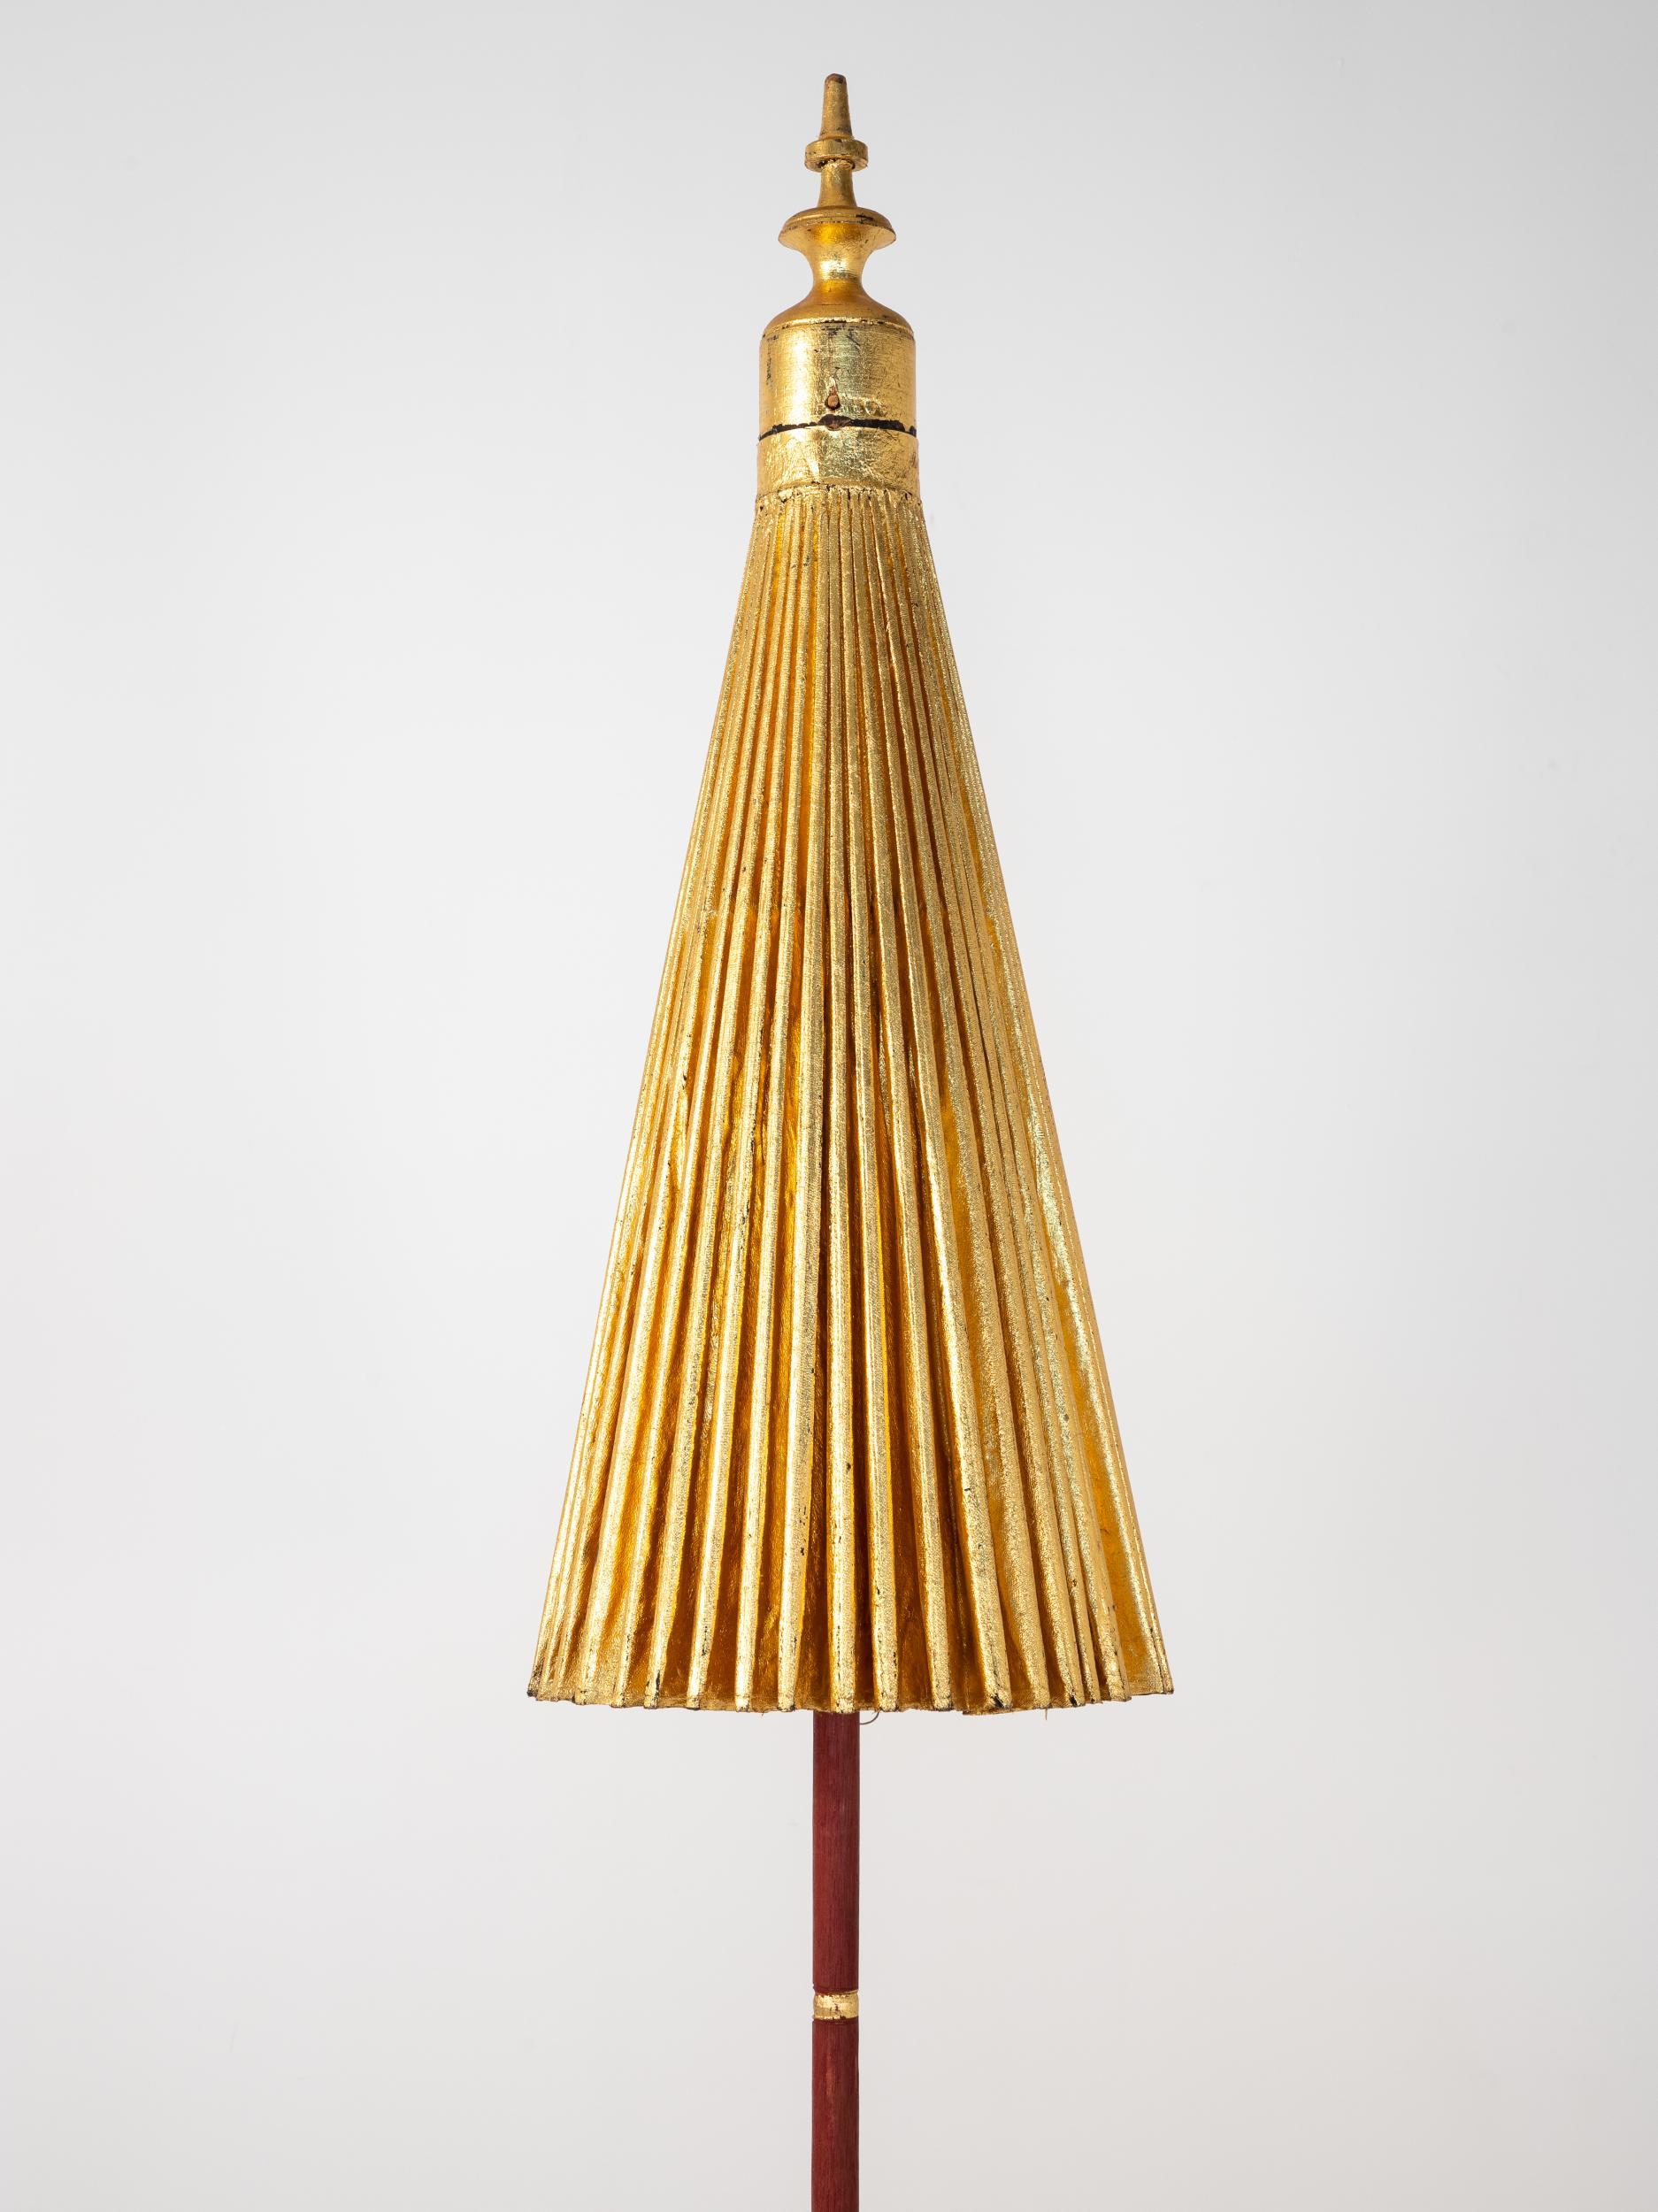 Stunning sun umbrella with a gilt exterior and a painted wood column with a gold finial at the top. The gold umbrella opens to reveal a brilliant pattern of color created by woven threads anchored by a black interior. The column of the umbrella is